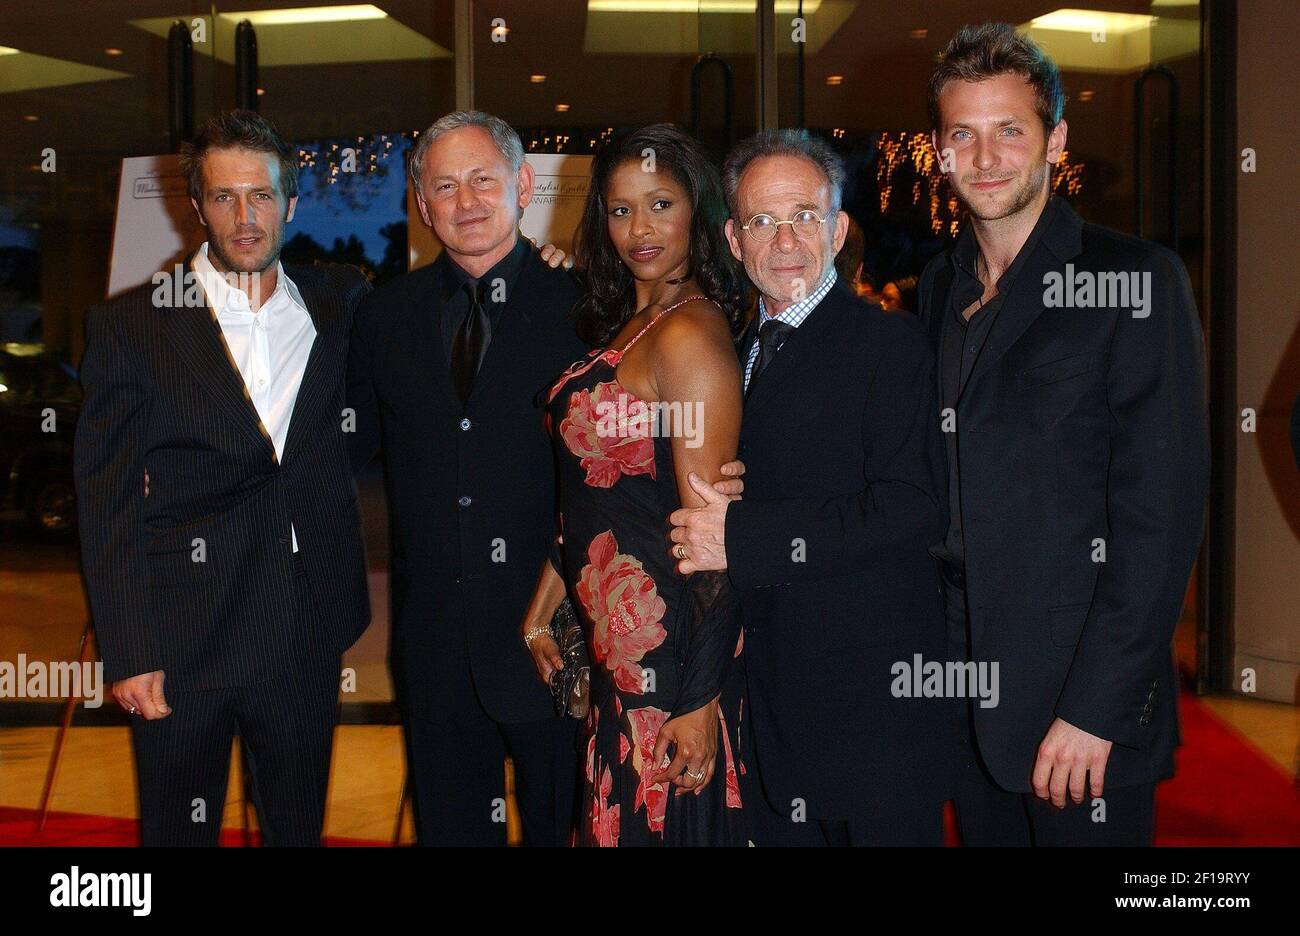 KRT ENTERTAINMENT STORY SLUGGED: MAKEUP KRT PHOTOGRAPH BY LIONEL HAHN/ABACA  PRESS (February 17) Cast members of Alias (From left to right Michael  Vartan, Victor Garber, Merrin Dungey, Ron Rifkin and Bradley Cooper)